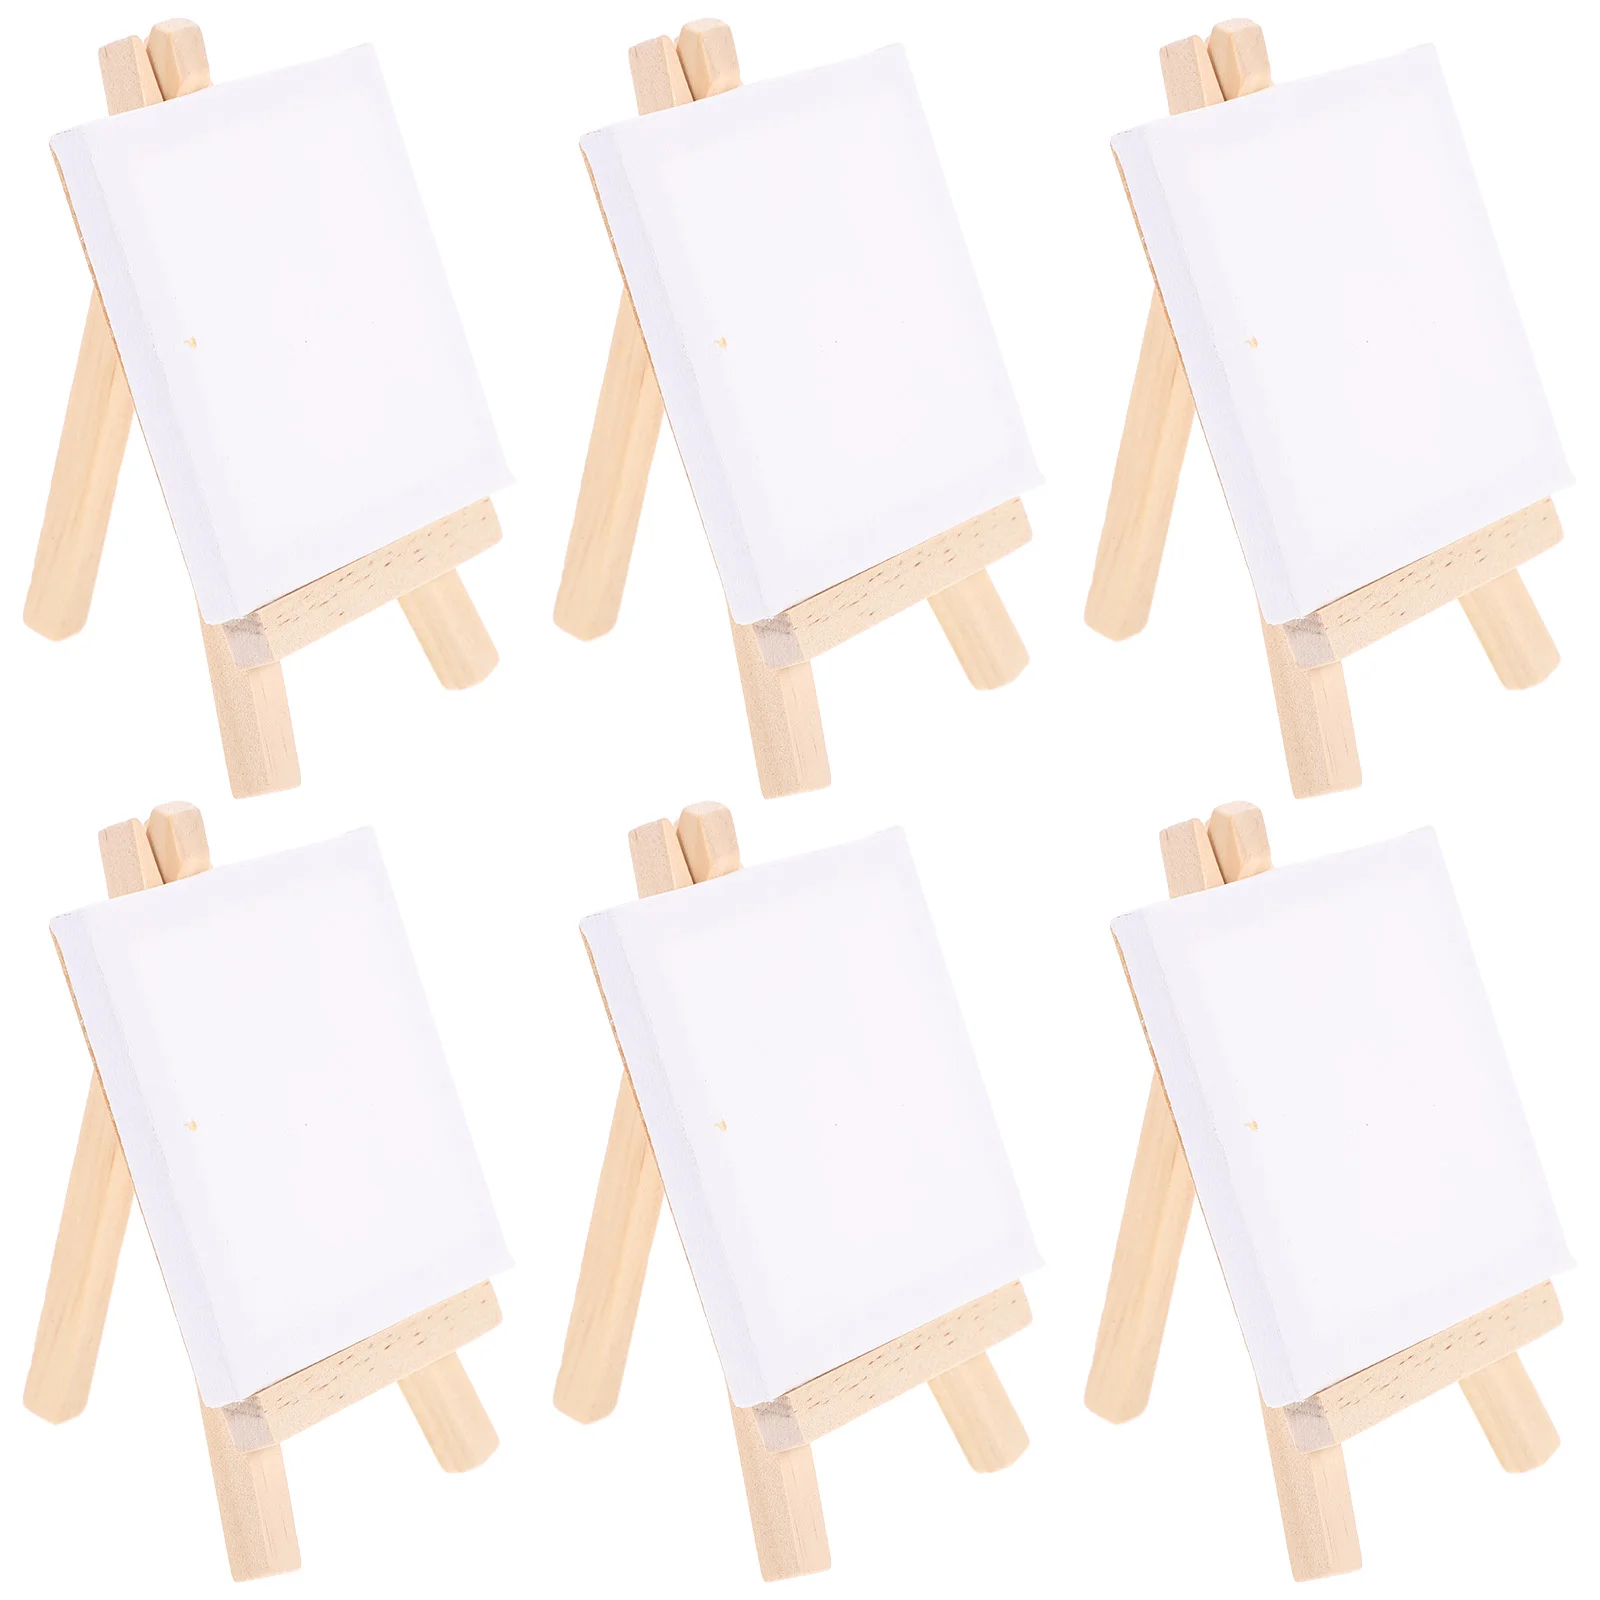 Mini Canvas and Easel, Cridoz 47 Pieces Mini Canvas Painting Set